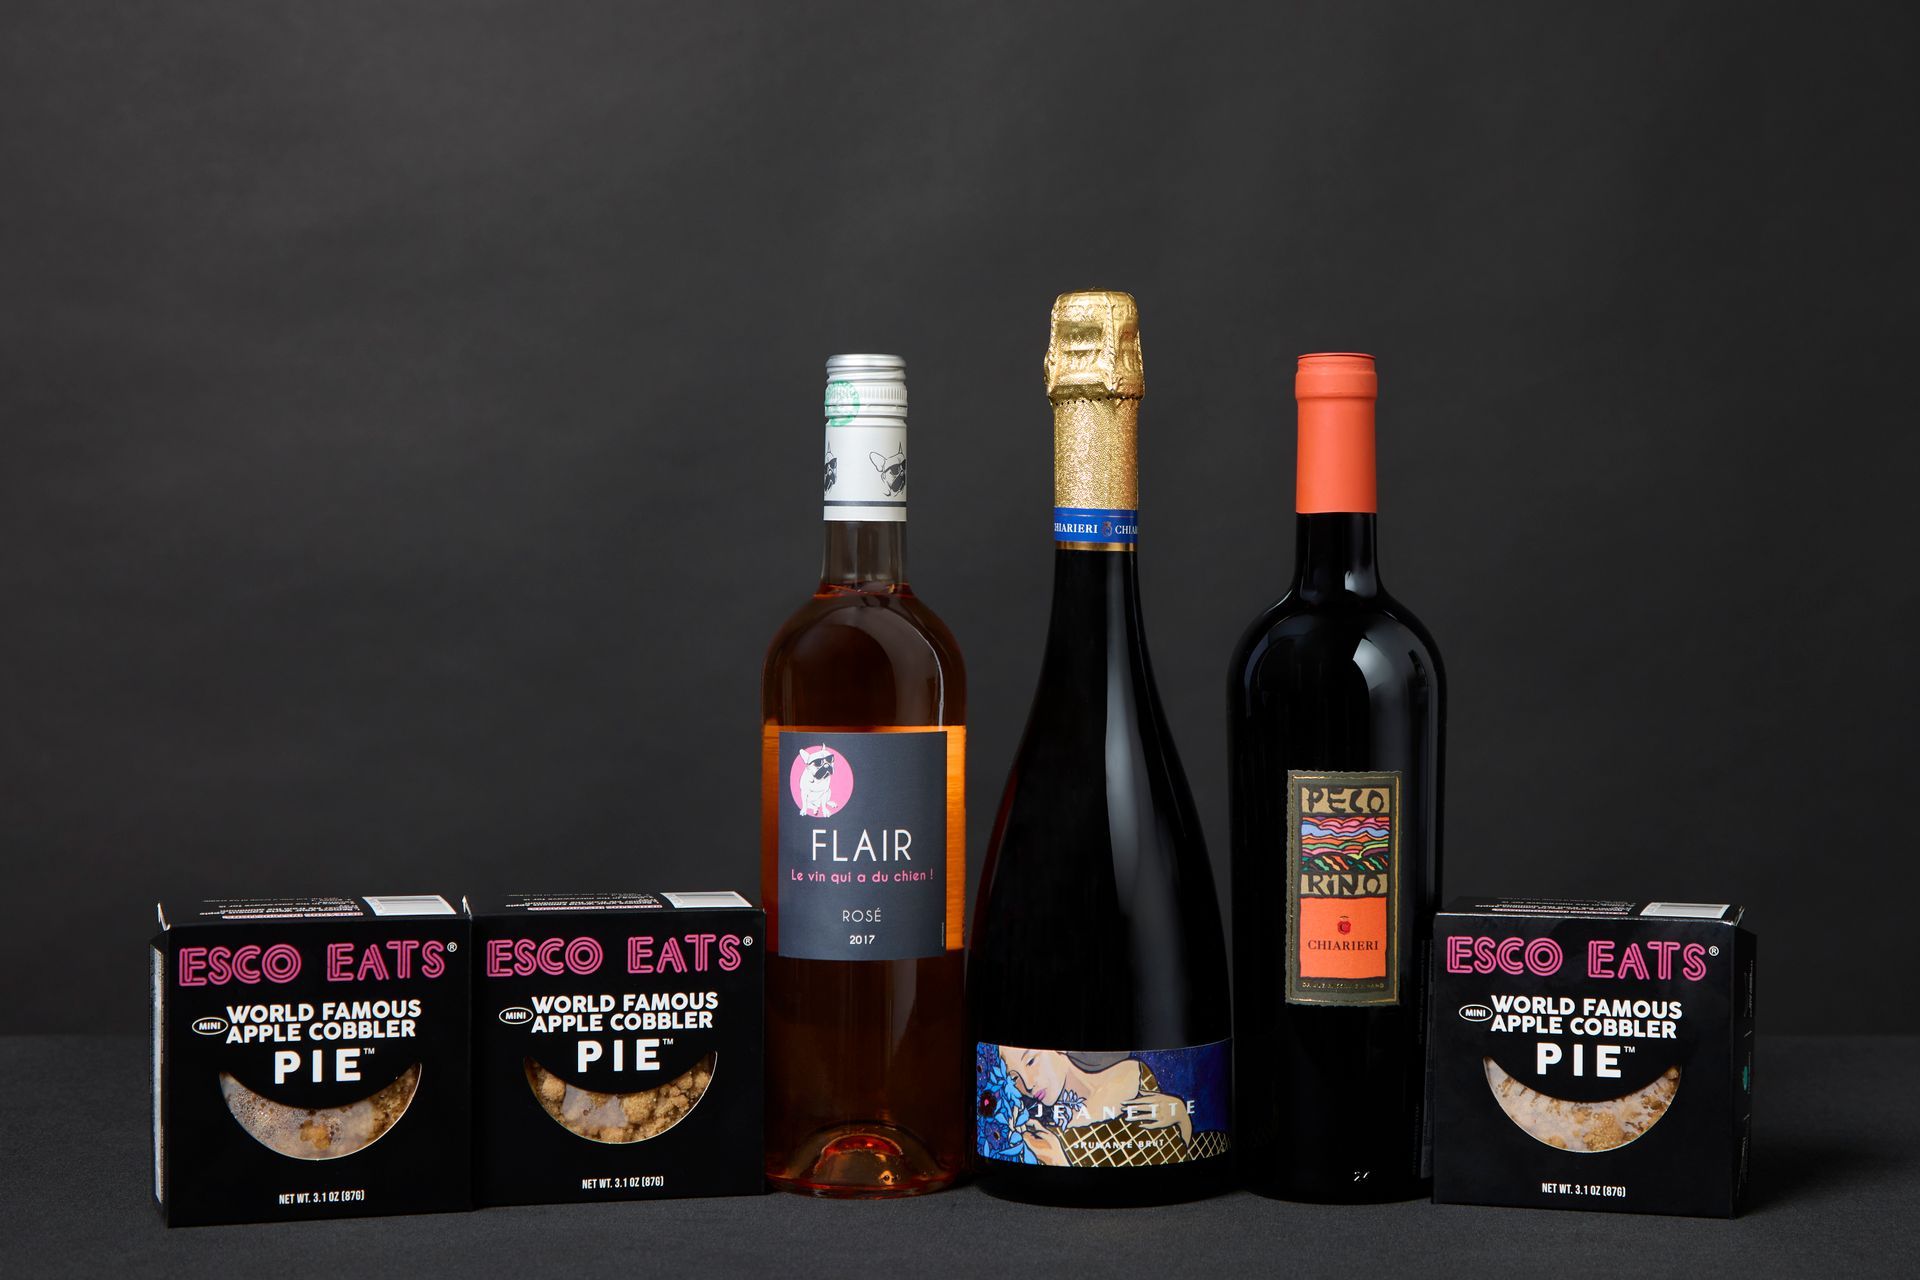 virtual wine event that pairs specifically with the World Famous Apple Cobbler Pie by Esco Eats